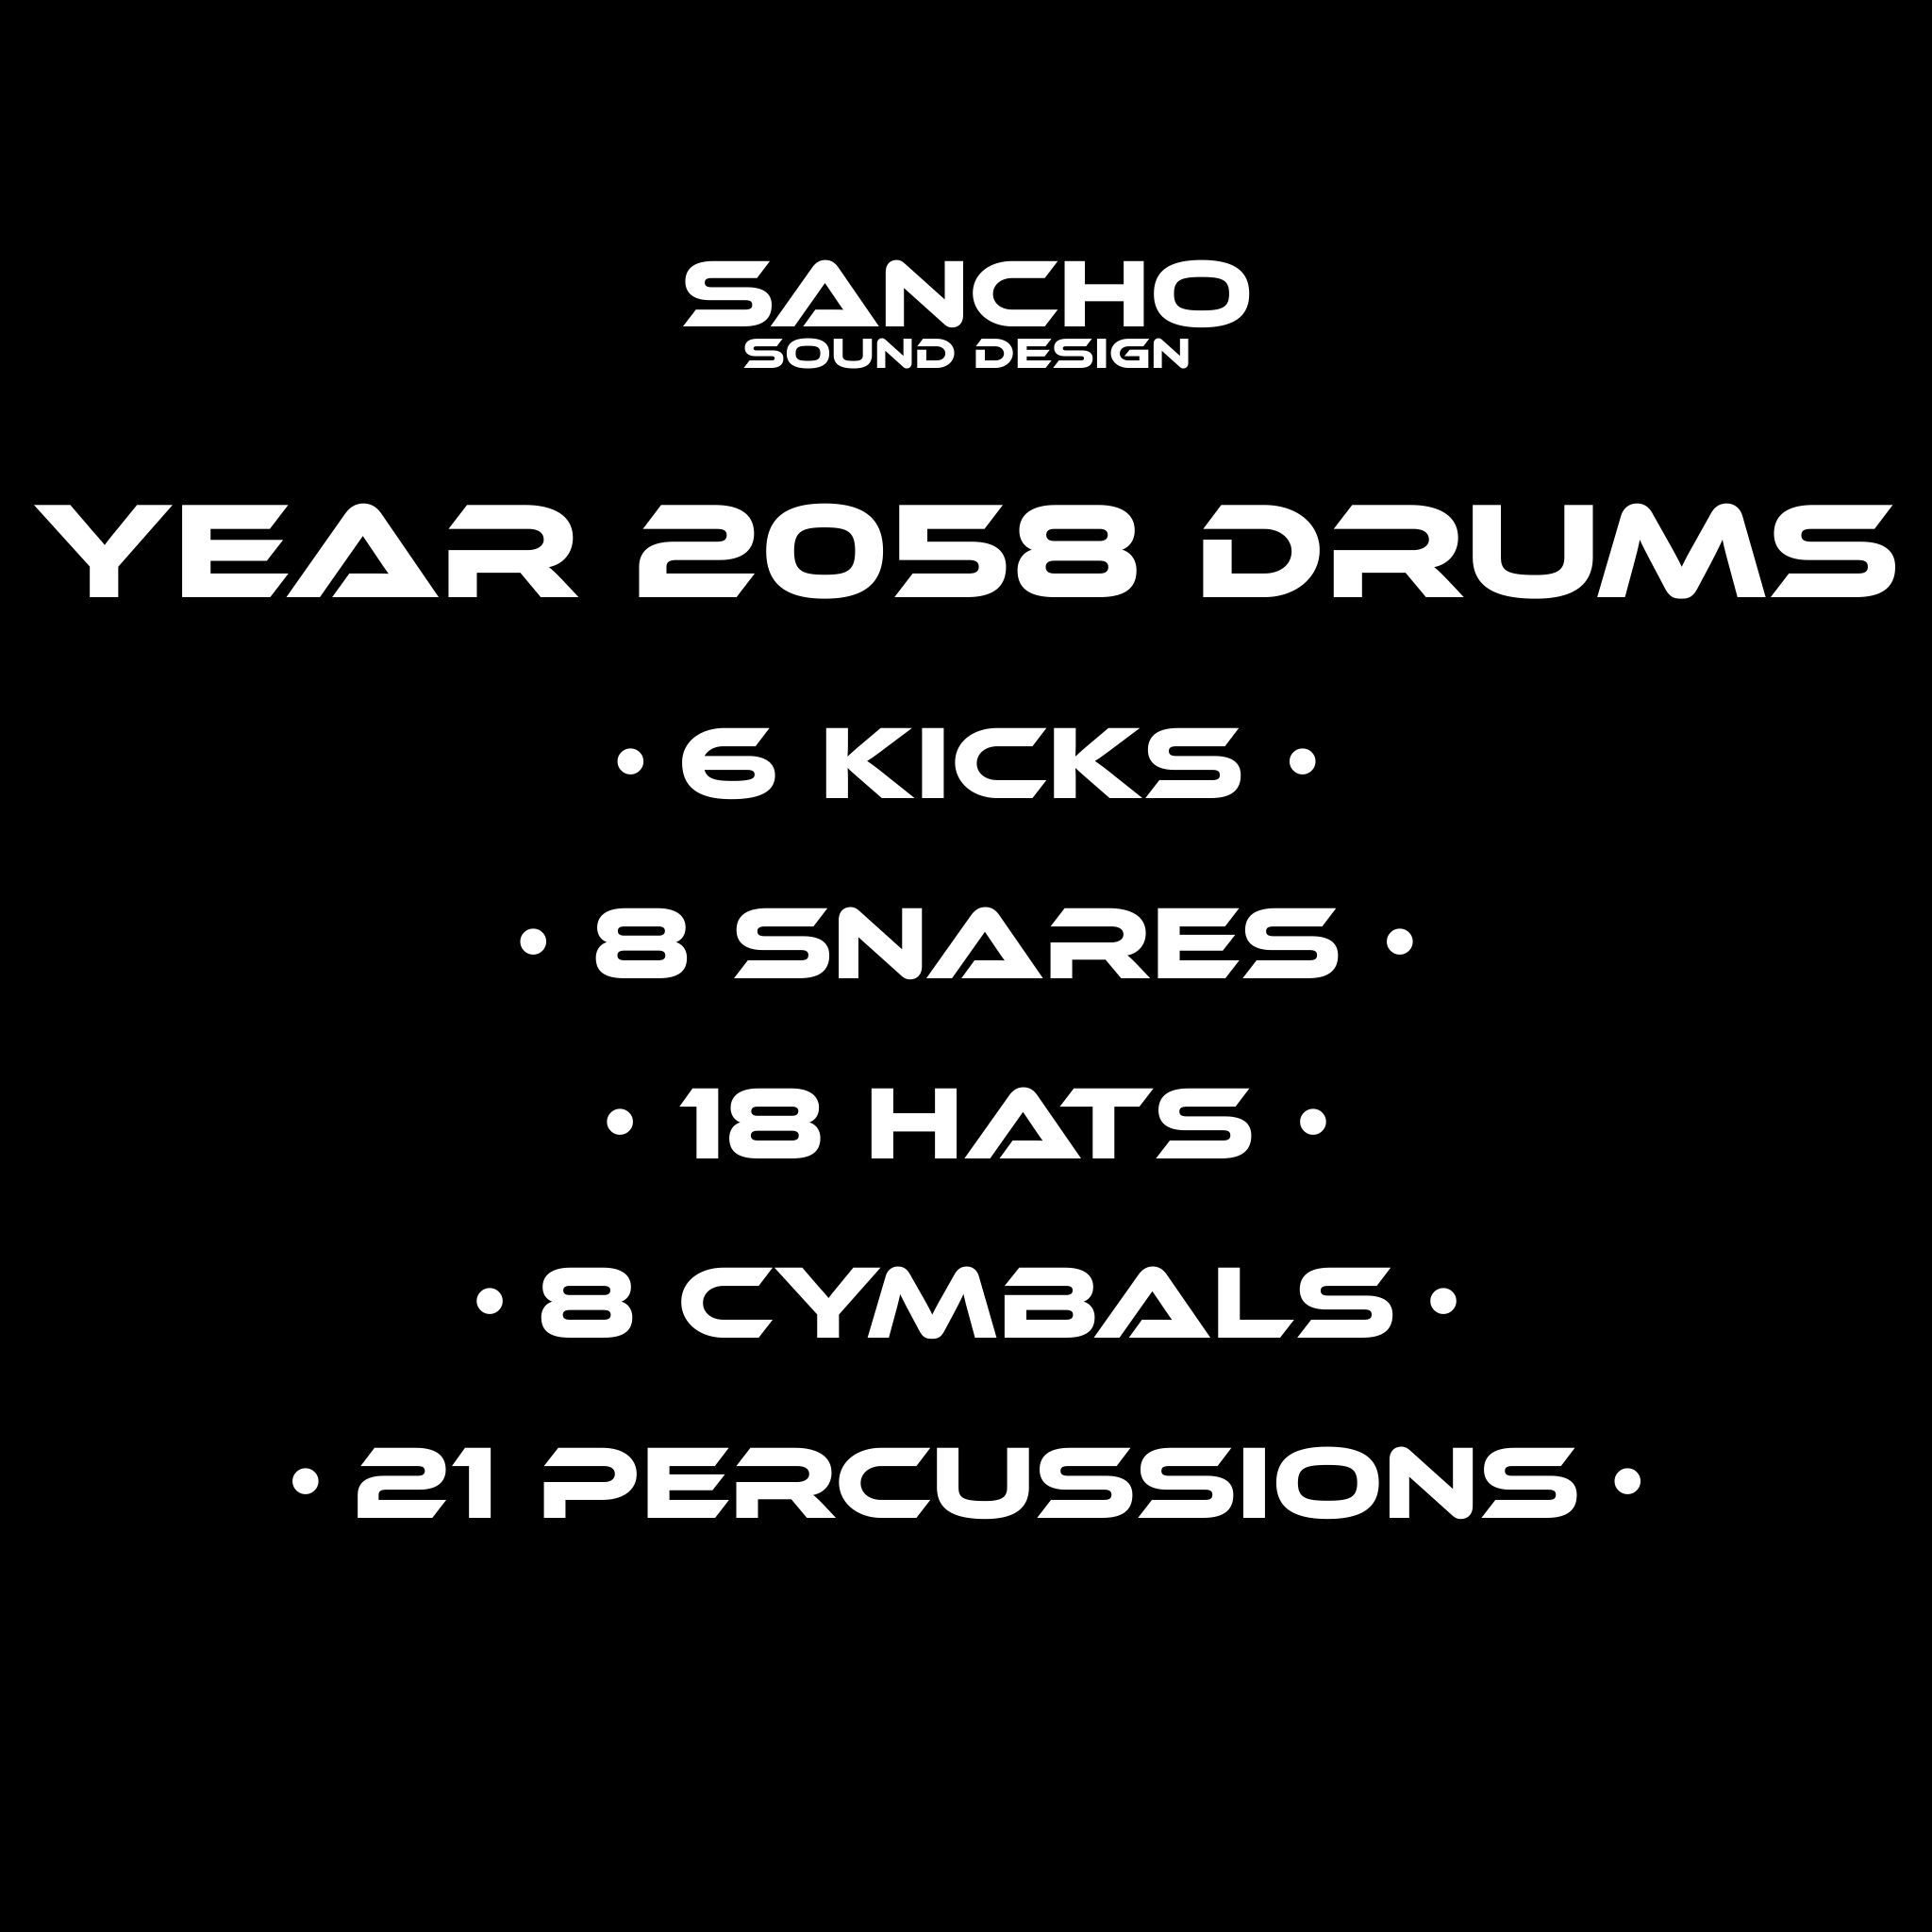 year2058drums.png